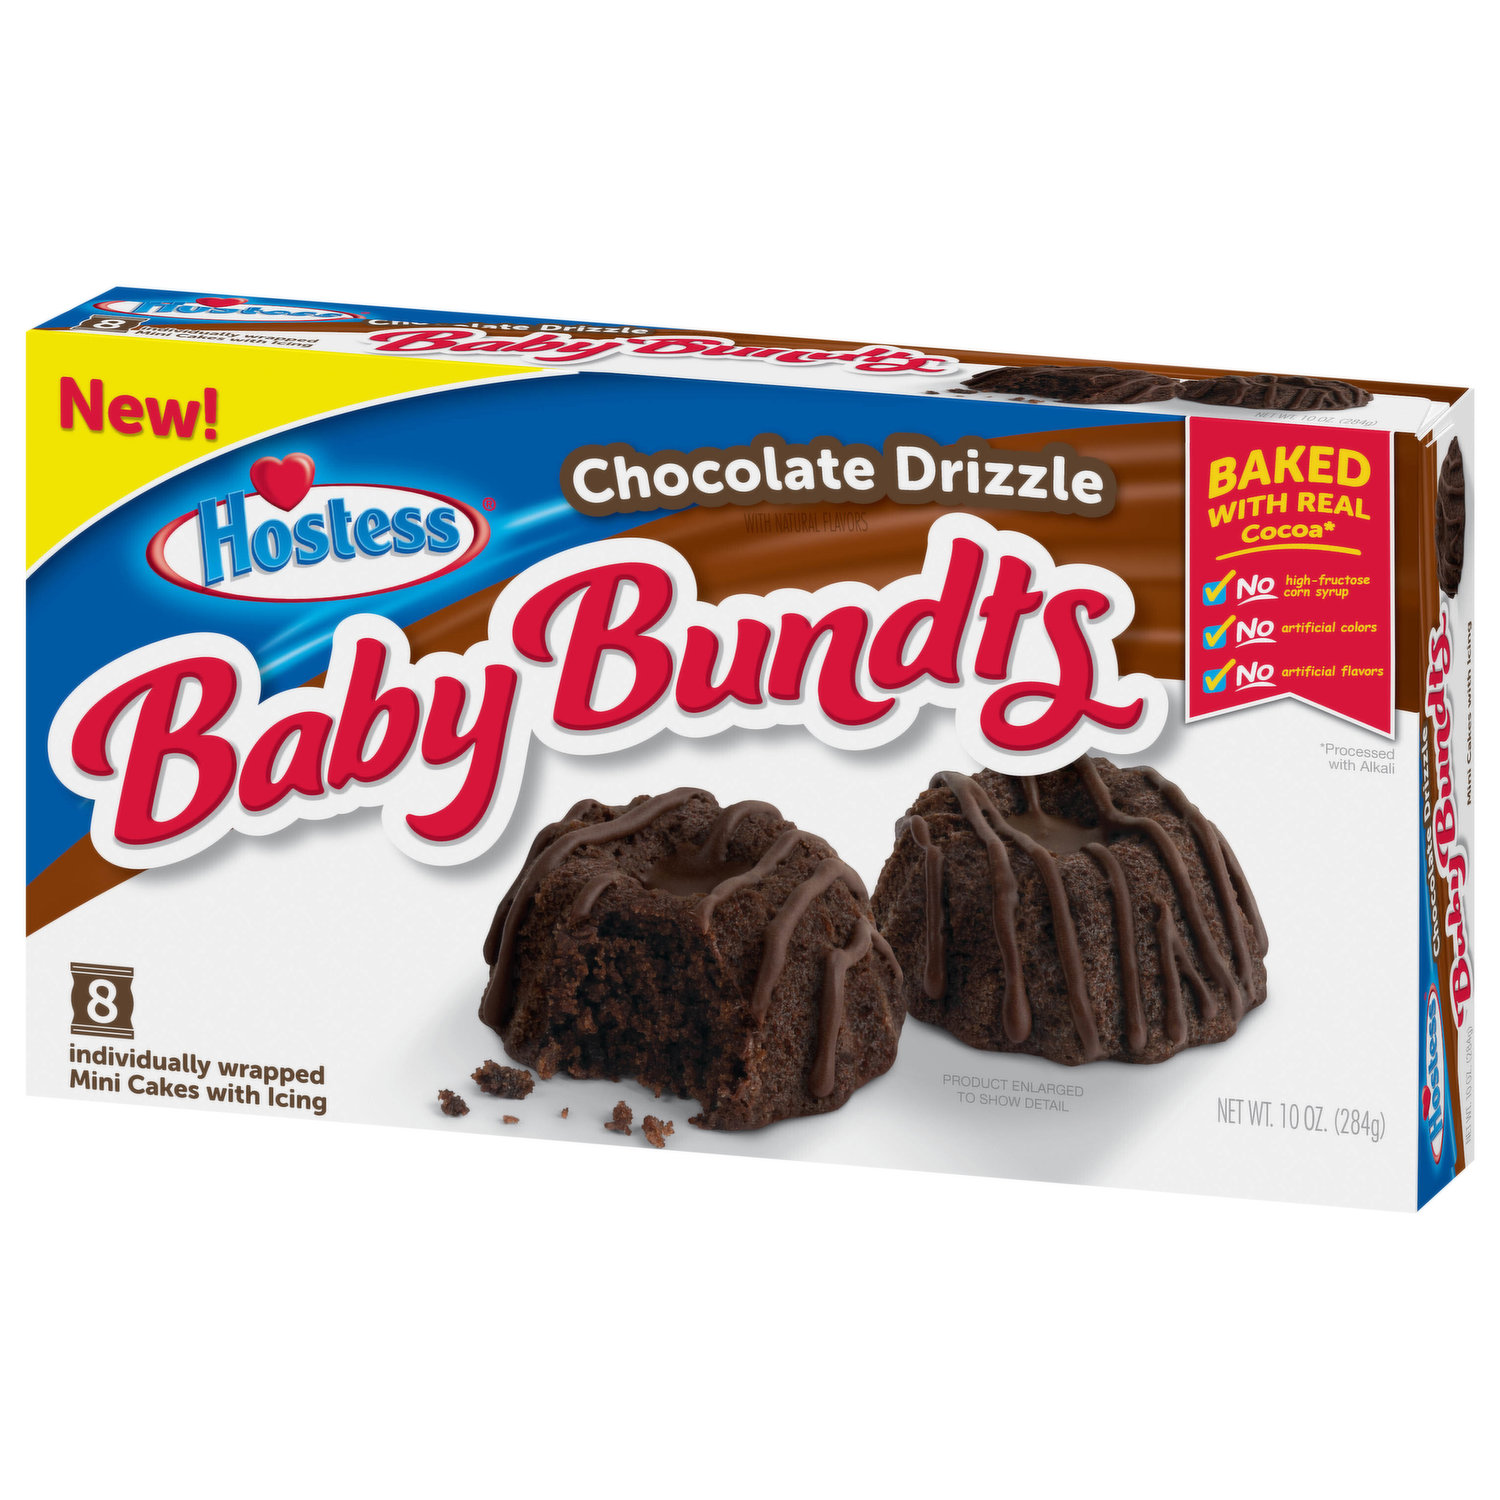 New Hostess Bake Shop Products Review | POPSUGAR Food